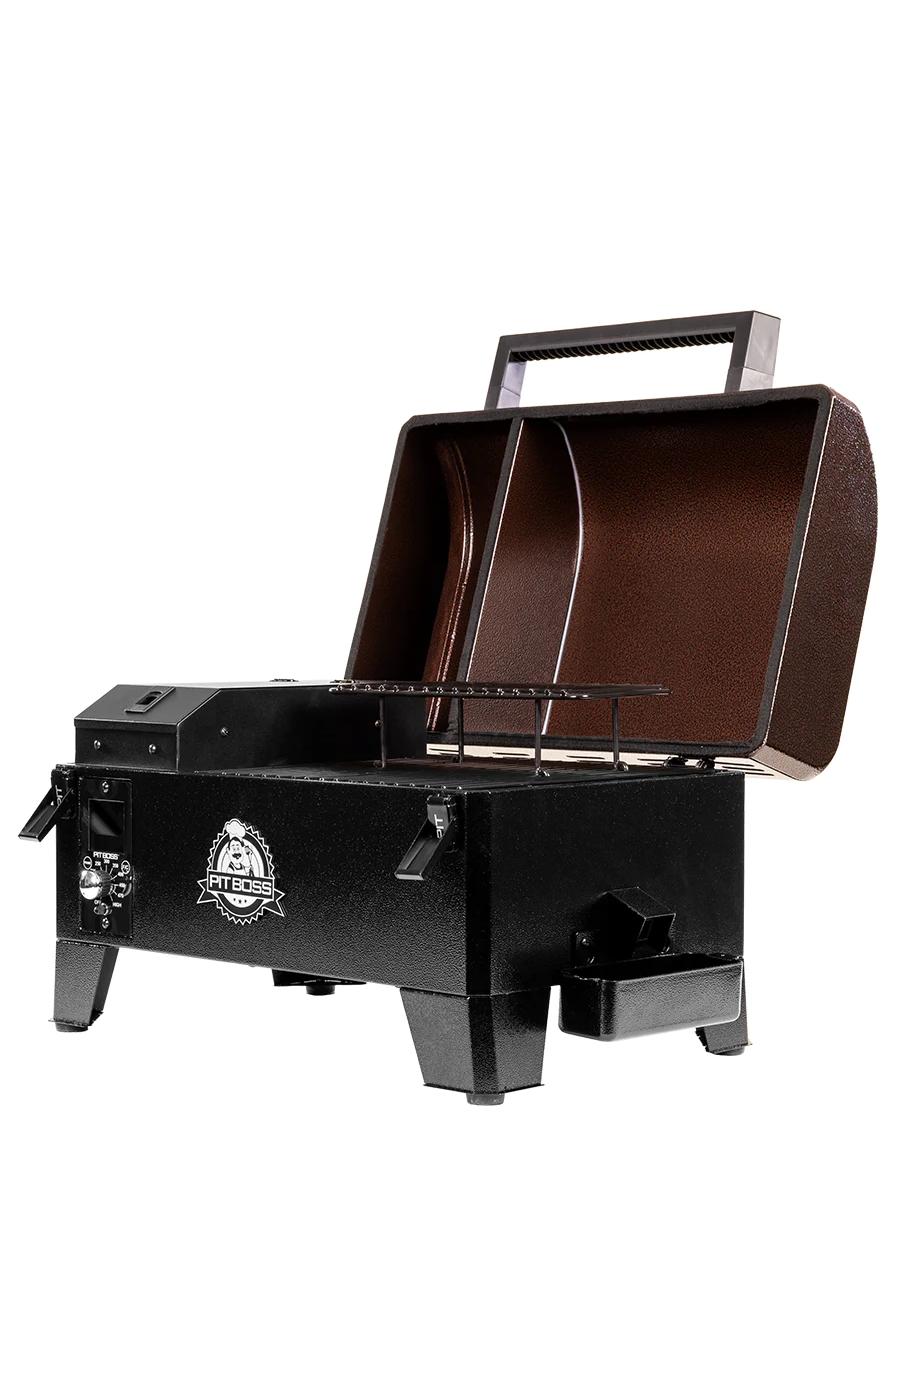 Pit Boss Mahogany 150PPS Tabletop Wood Pellet Grill; image 4 of 4